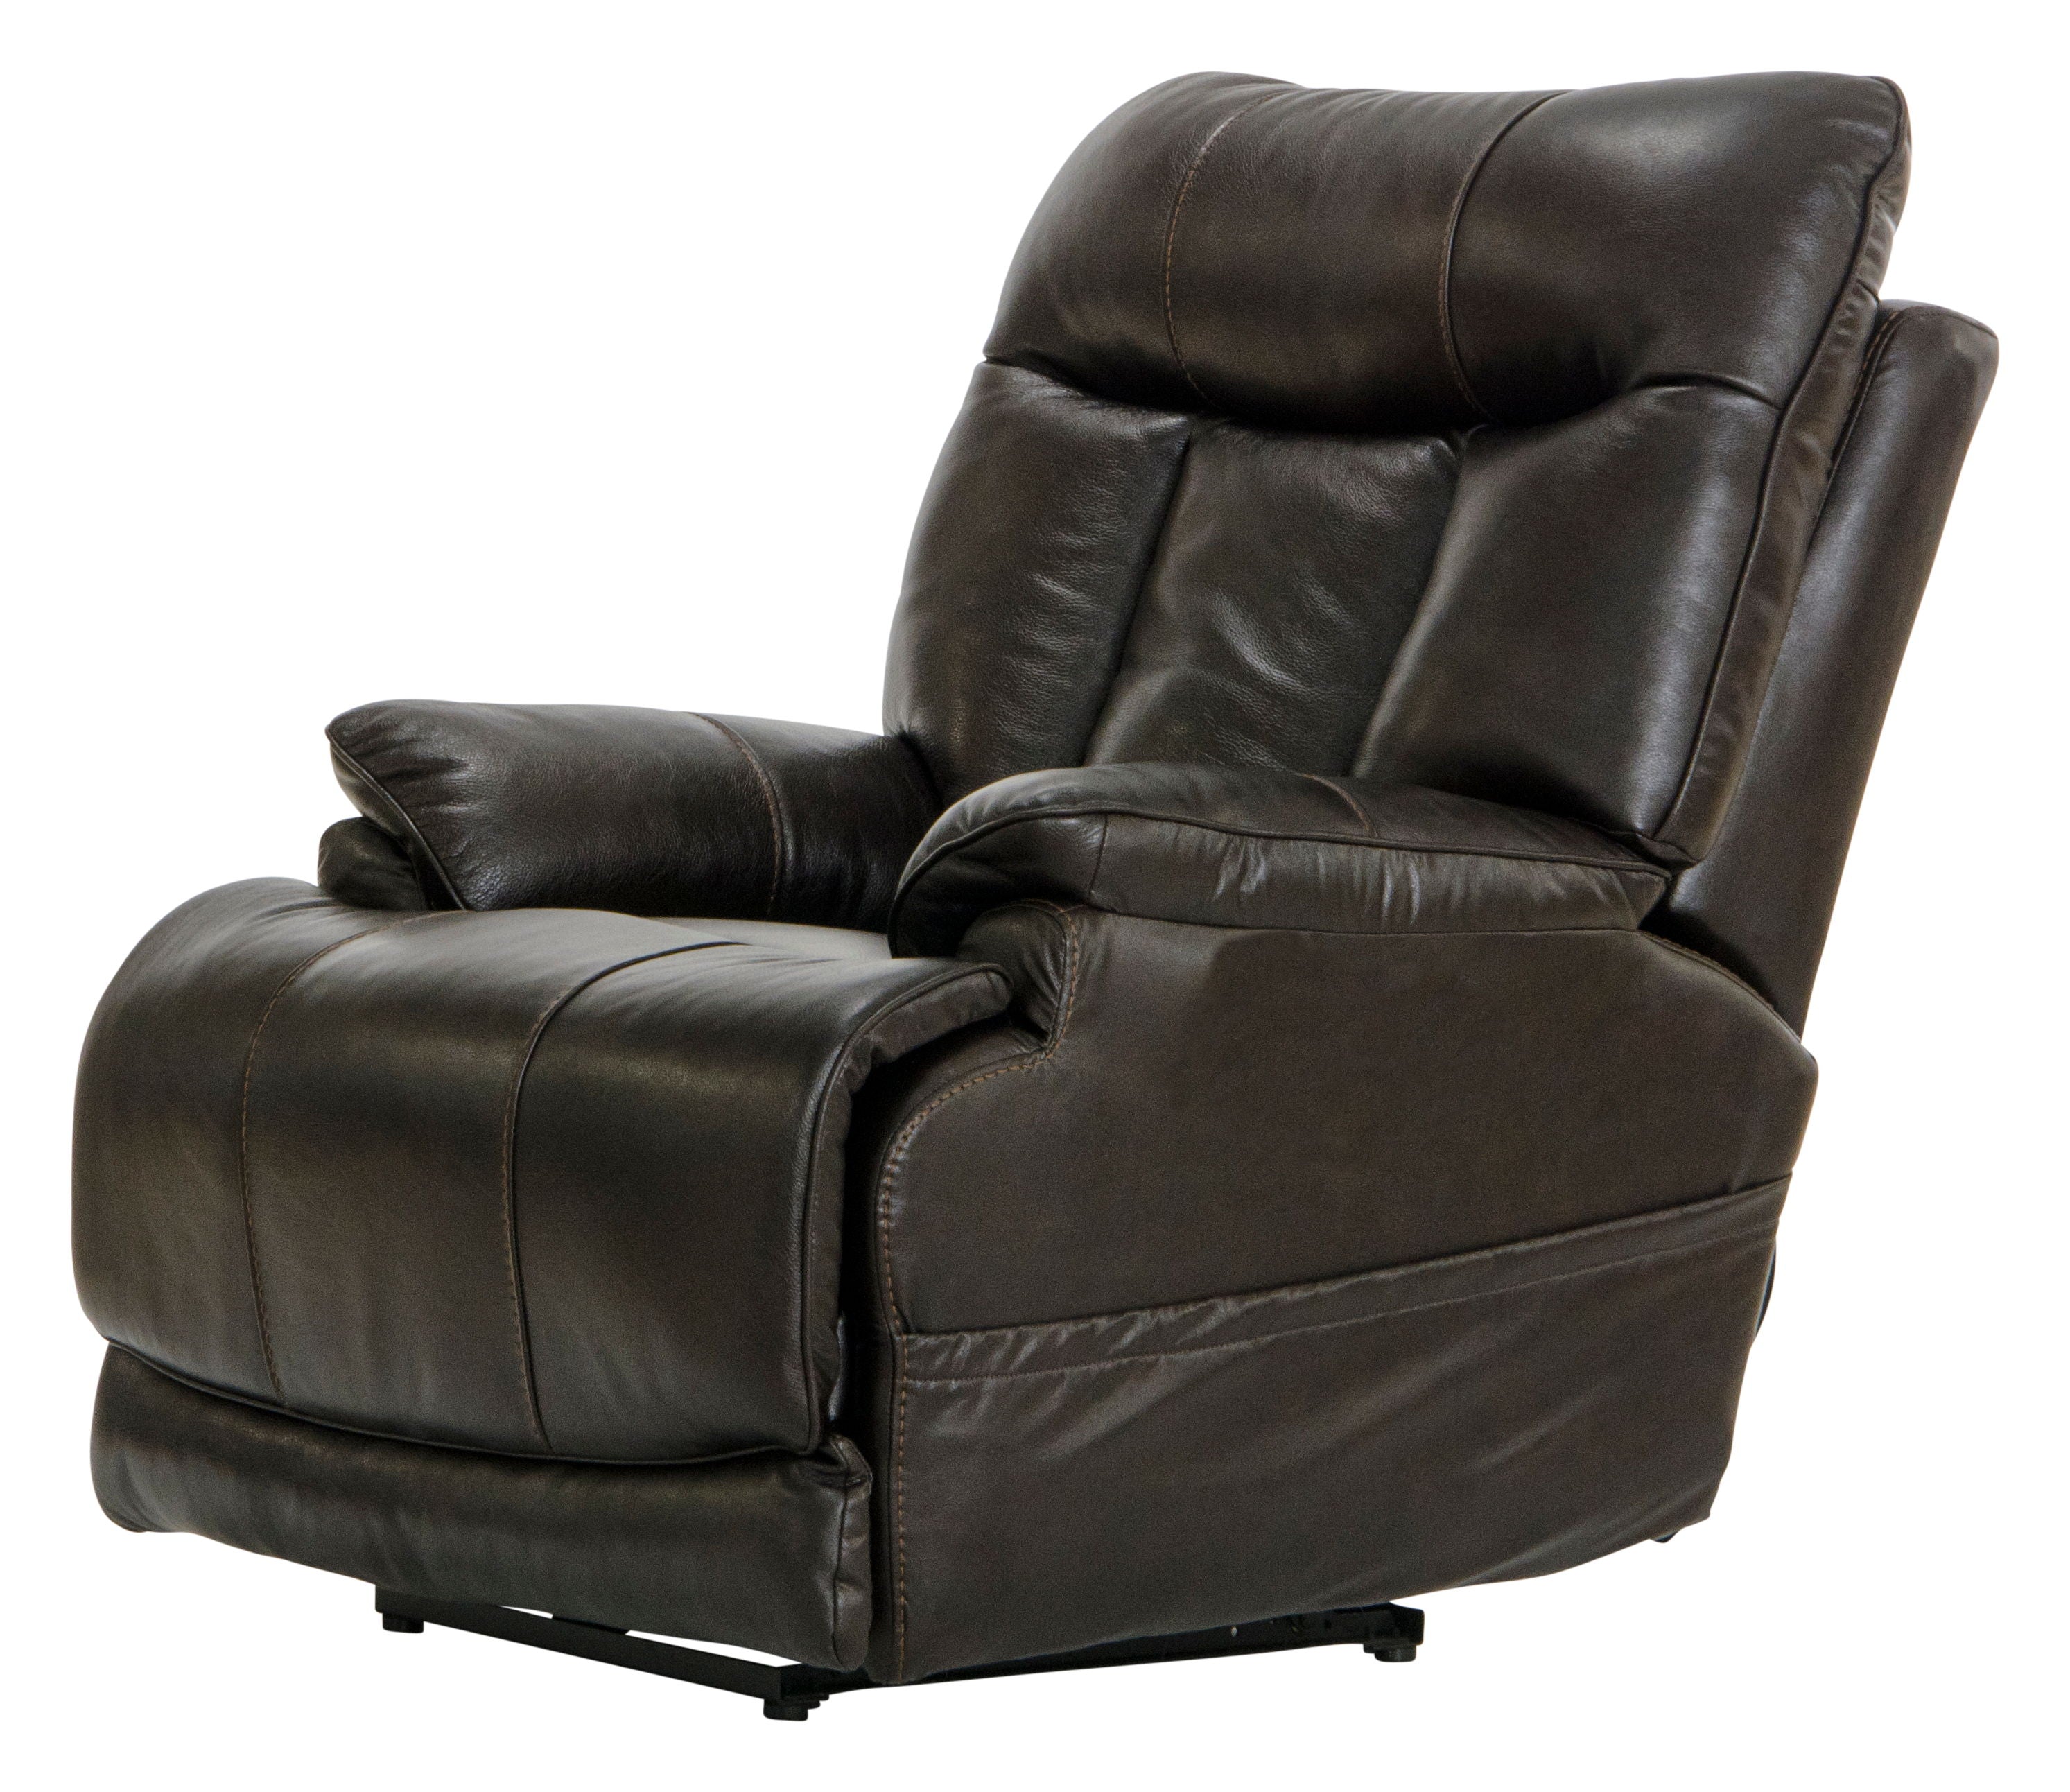 Naples - Power Lay Flat Recliner With Extended Ottoman - Chocolate